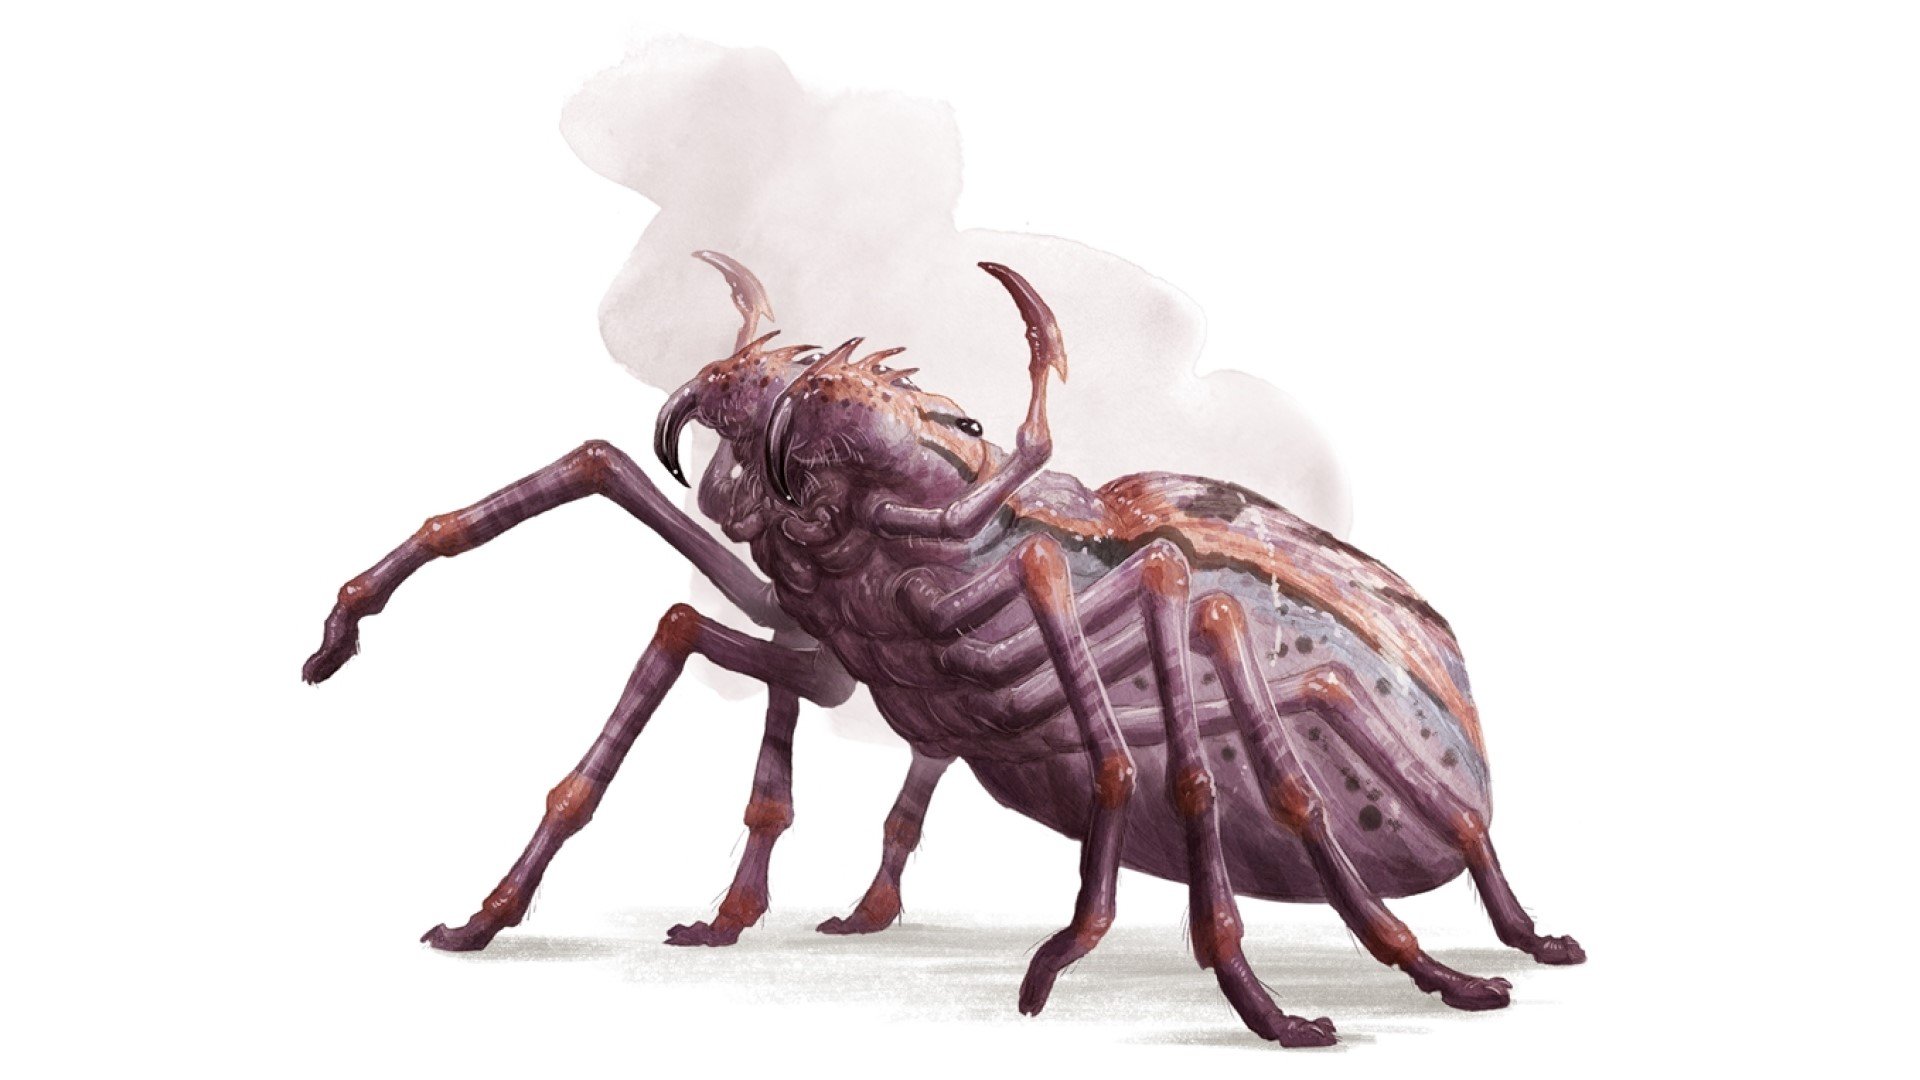 Dnd Giant Spider 5e - a pinkish giant spider monster with its fangs bared.